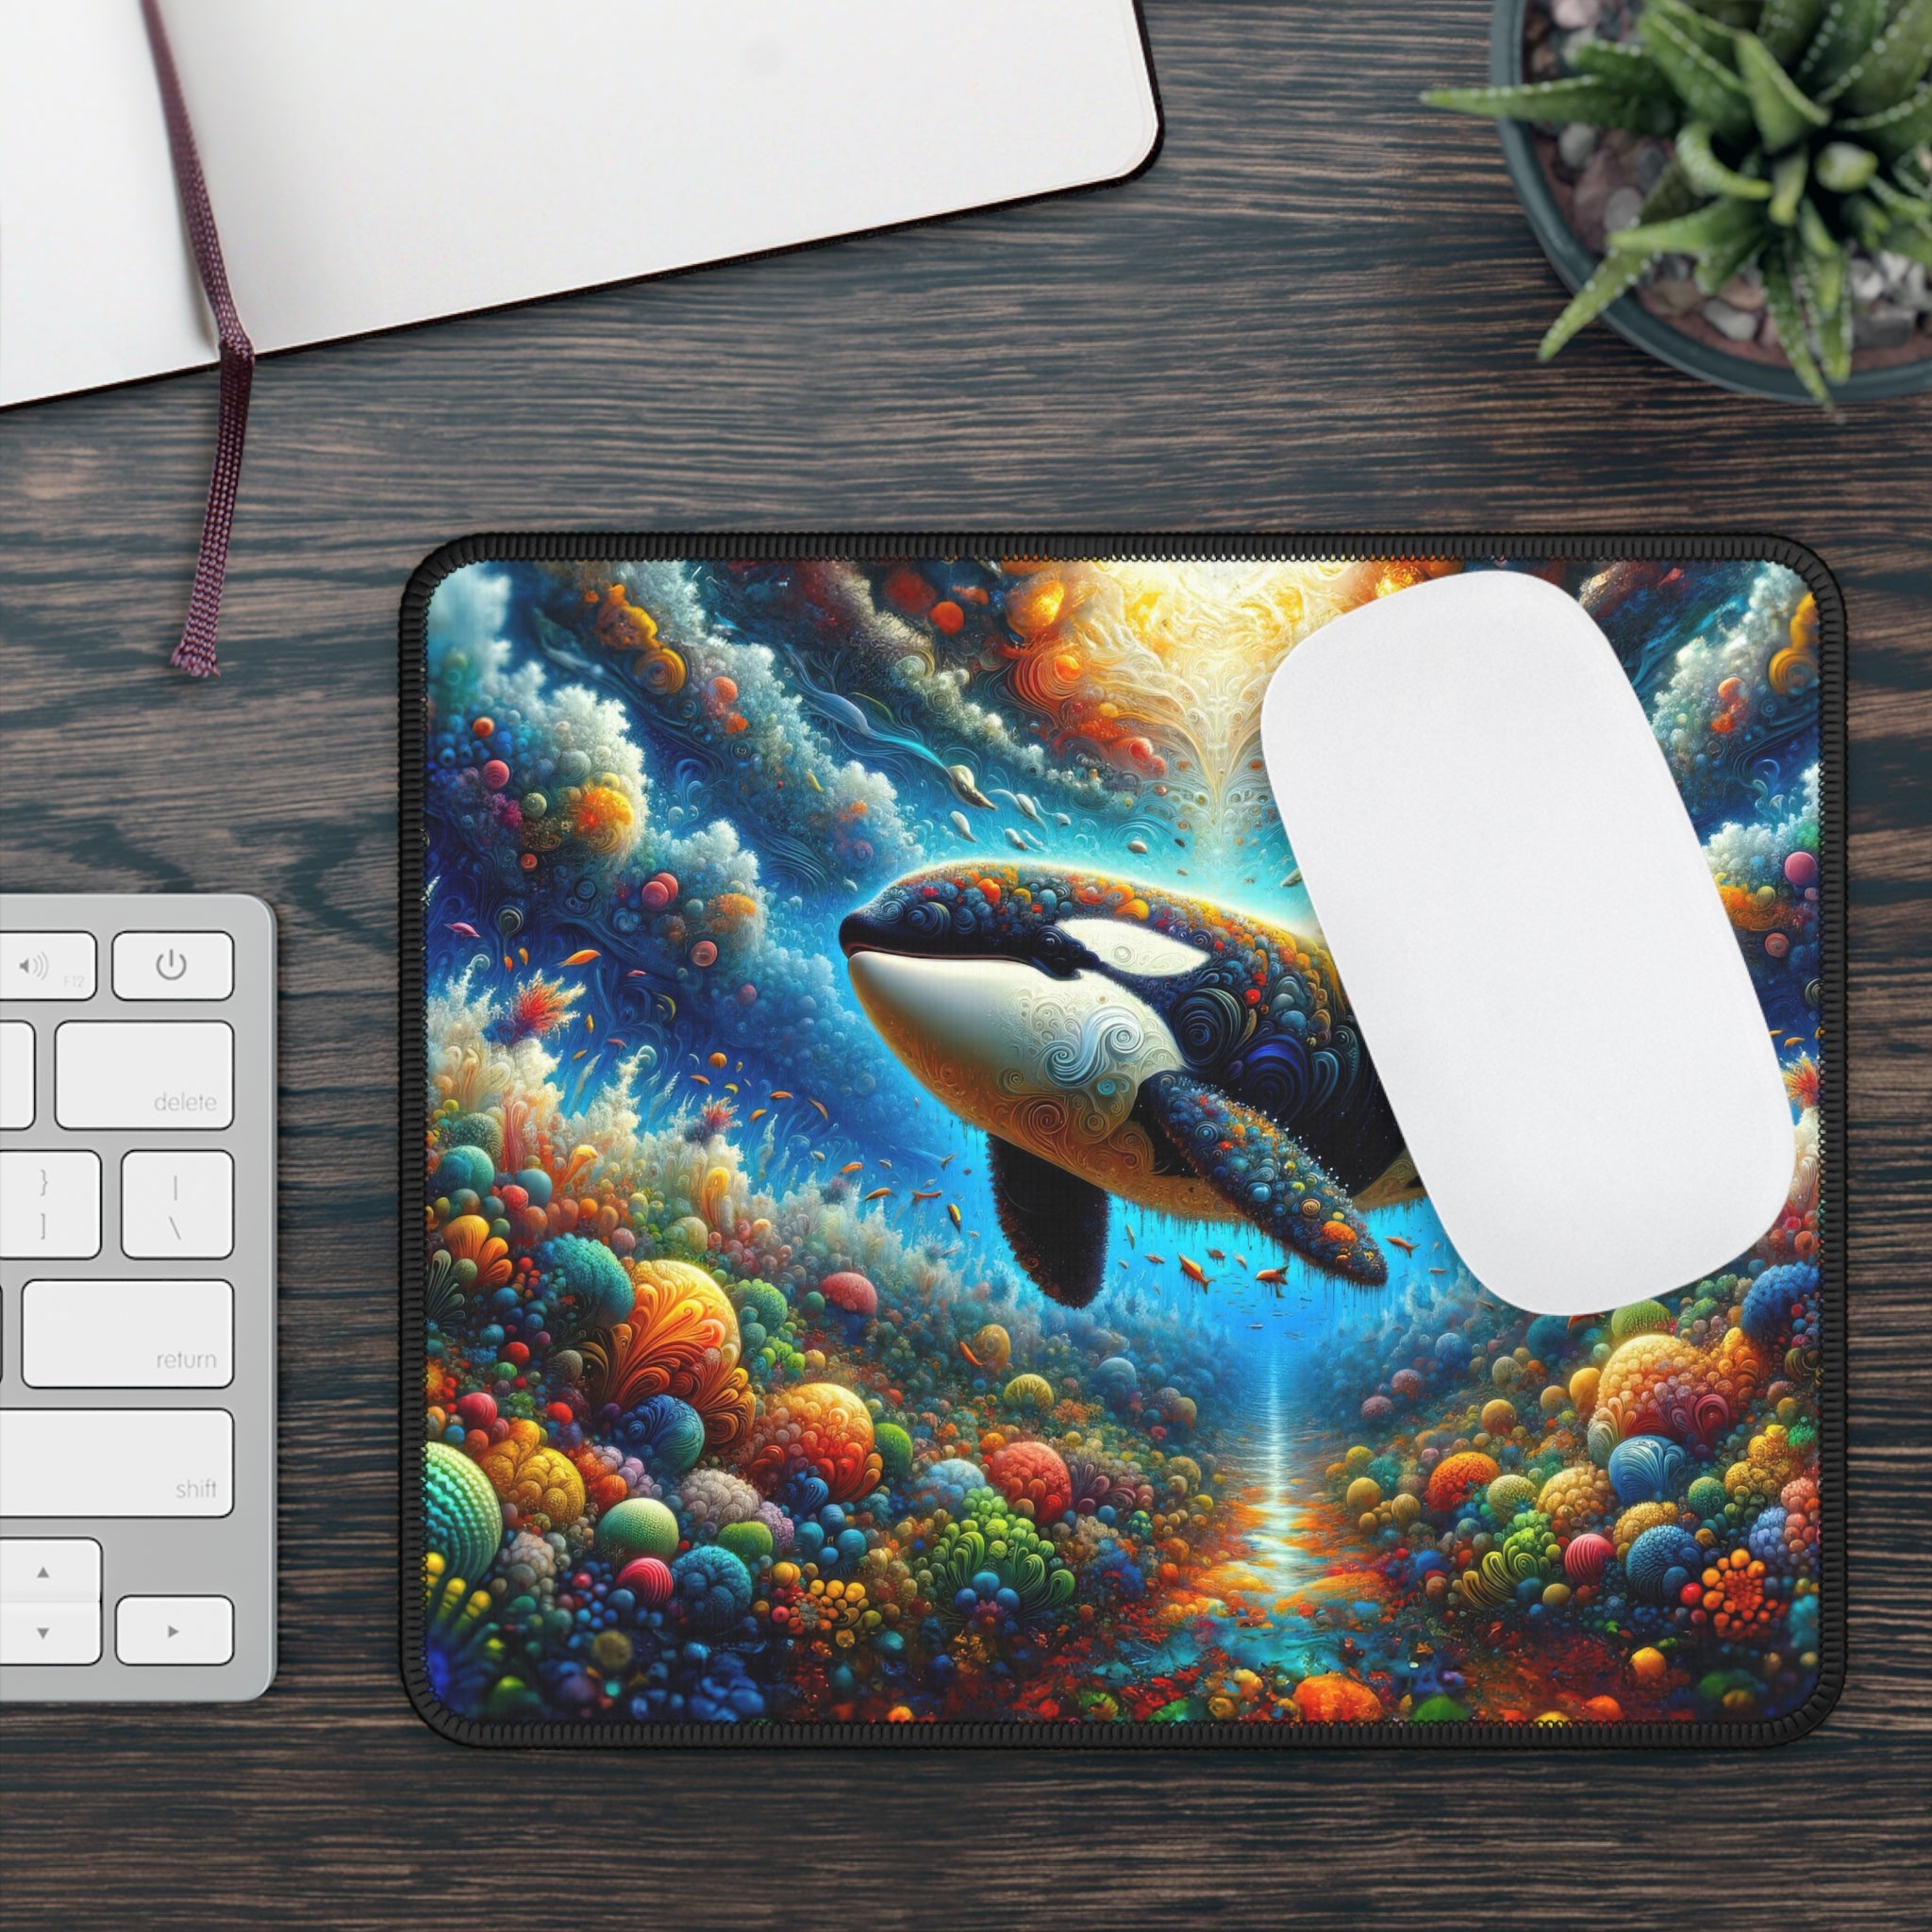 Reef of Reveries Gaming Mouse Pad